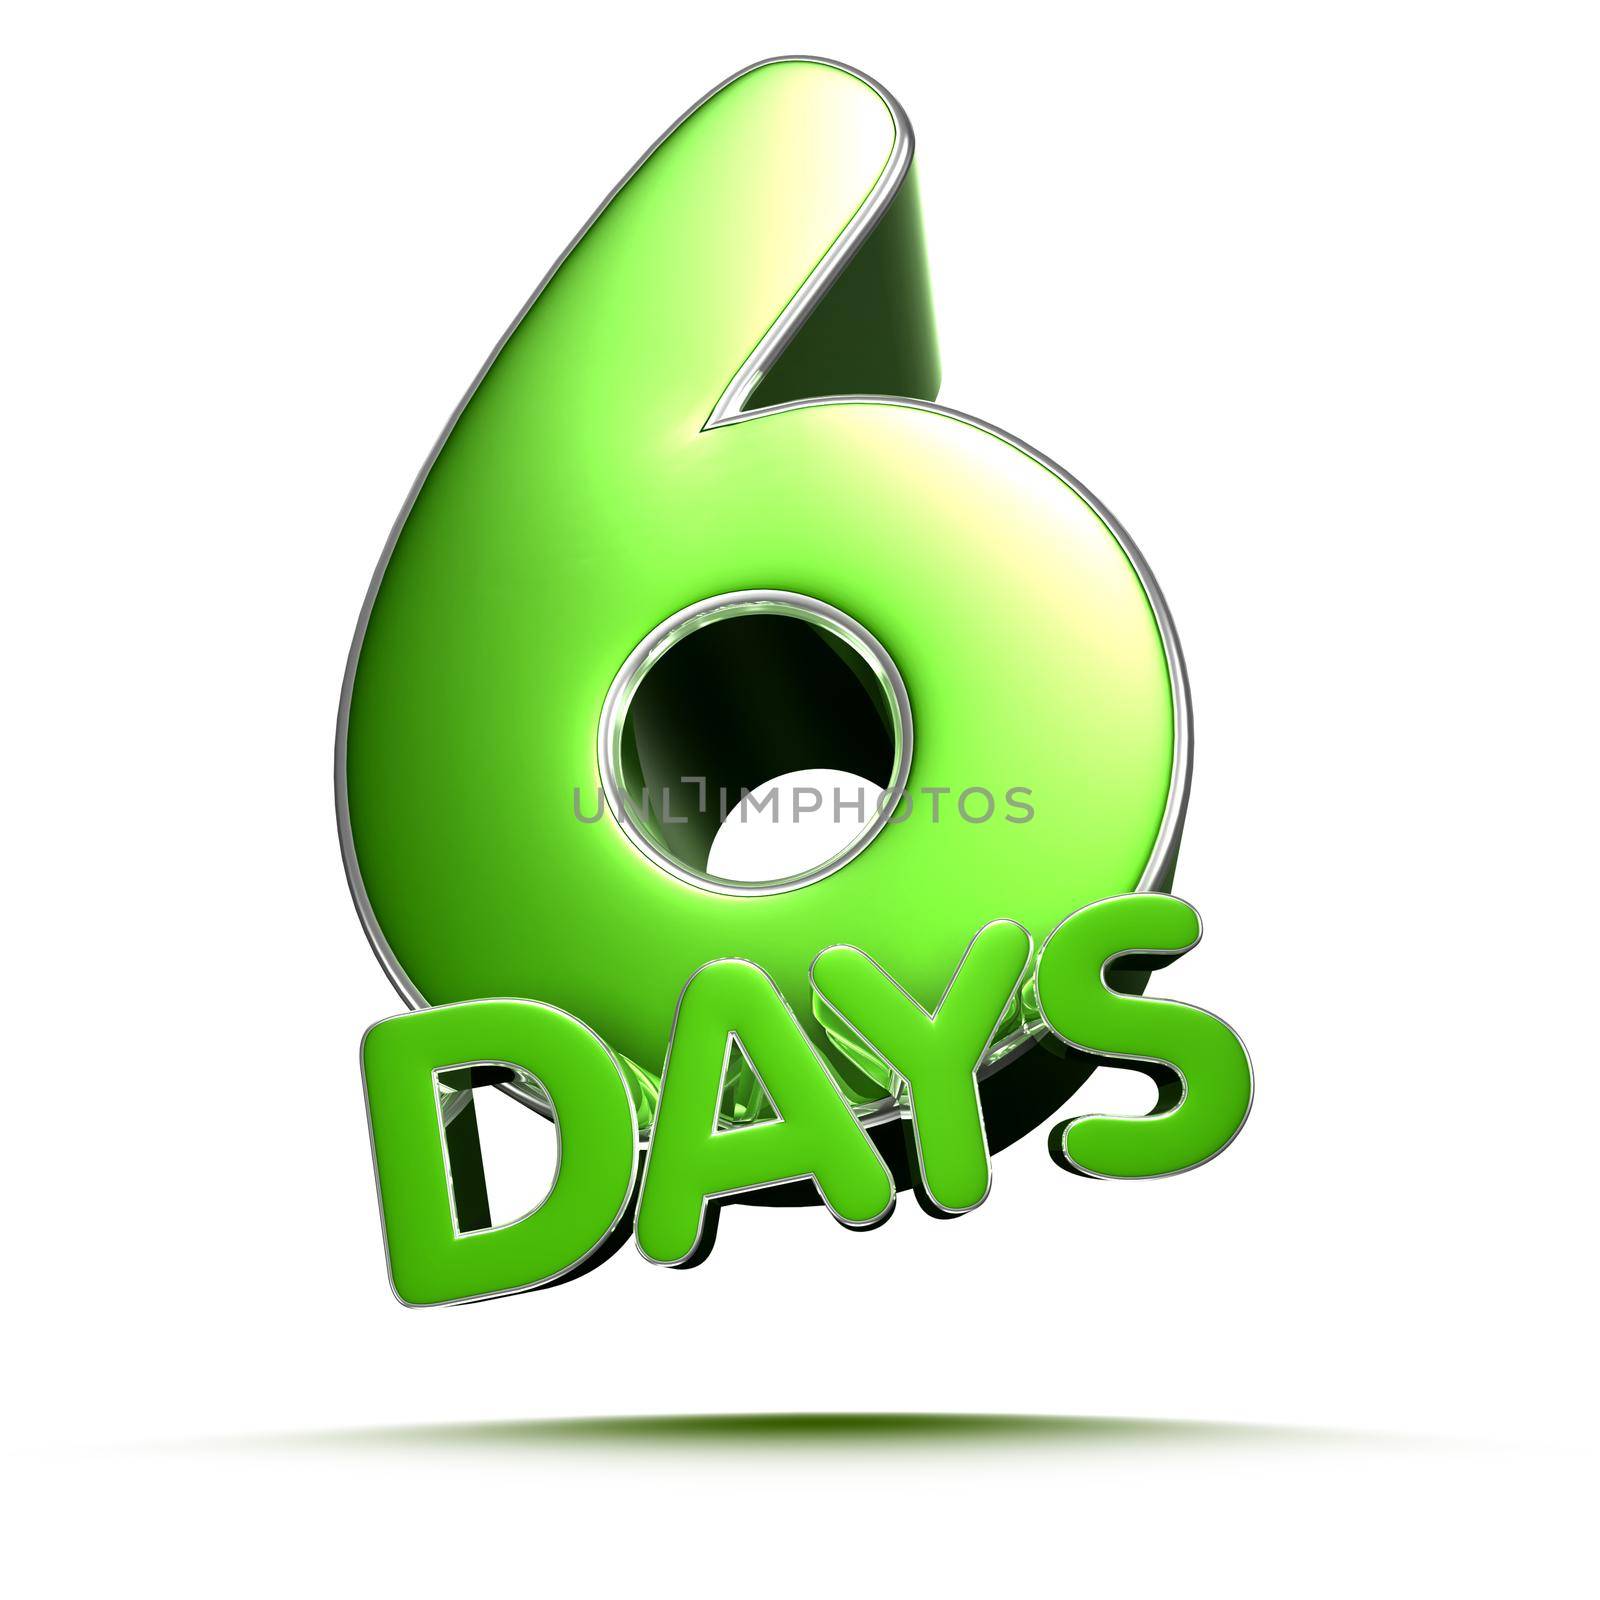 6 days green 3D illustration isolated on a white background with clipping path.